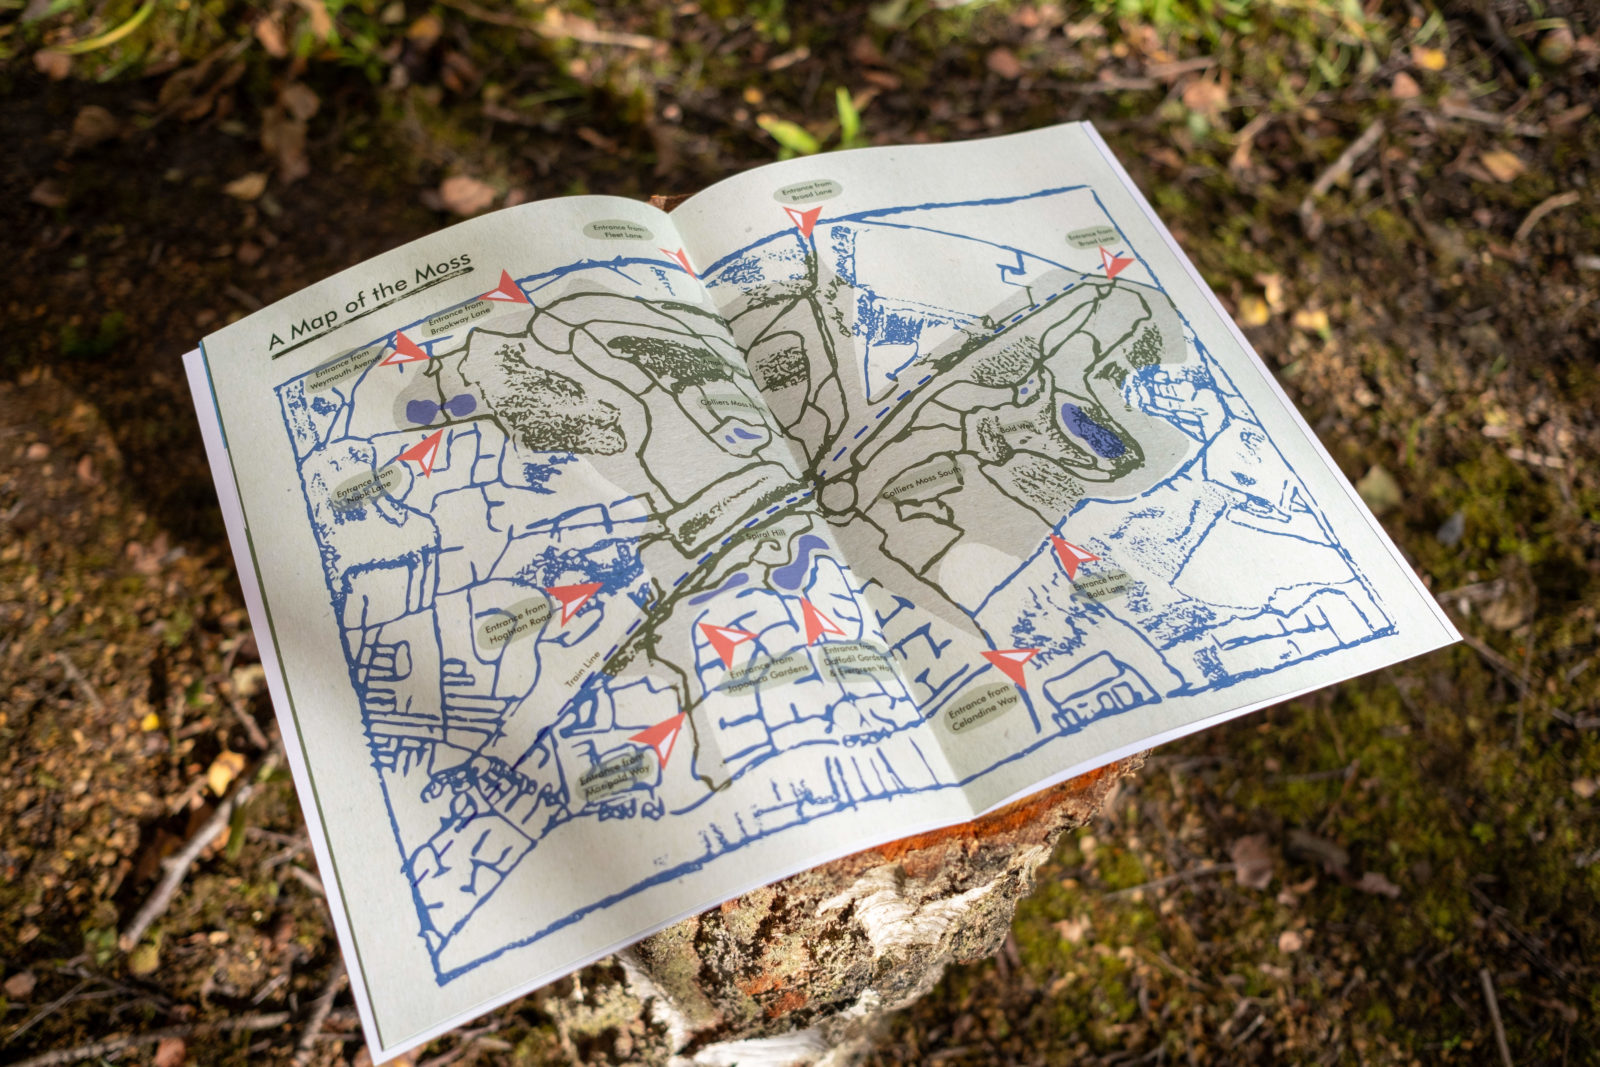 Photograph of a hand drawn map of Colliers Moss